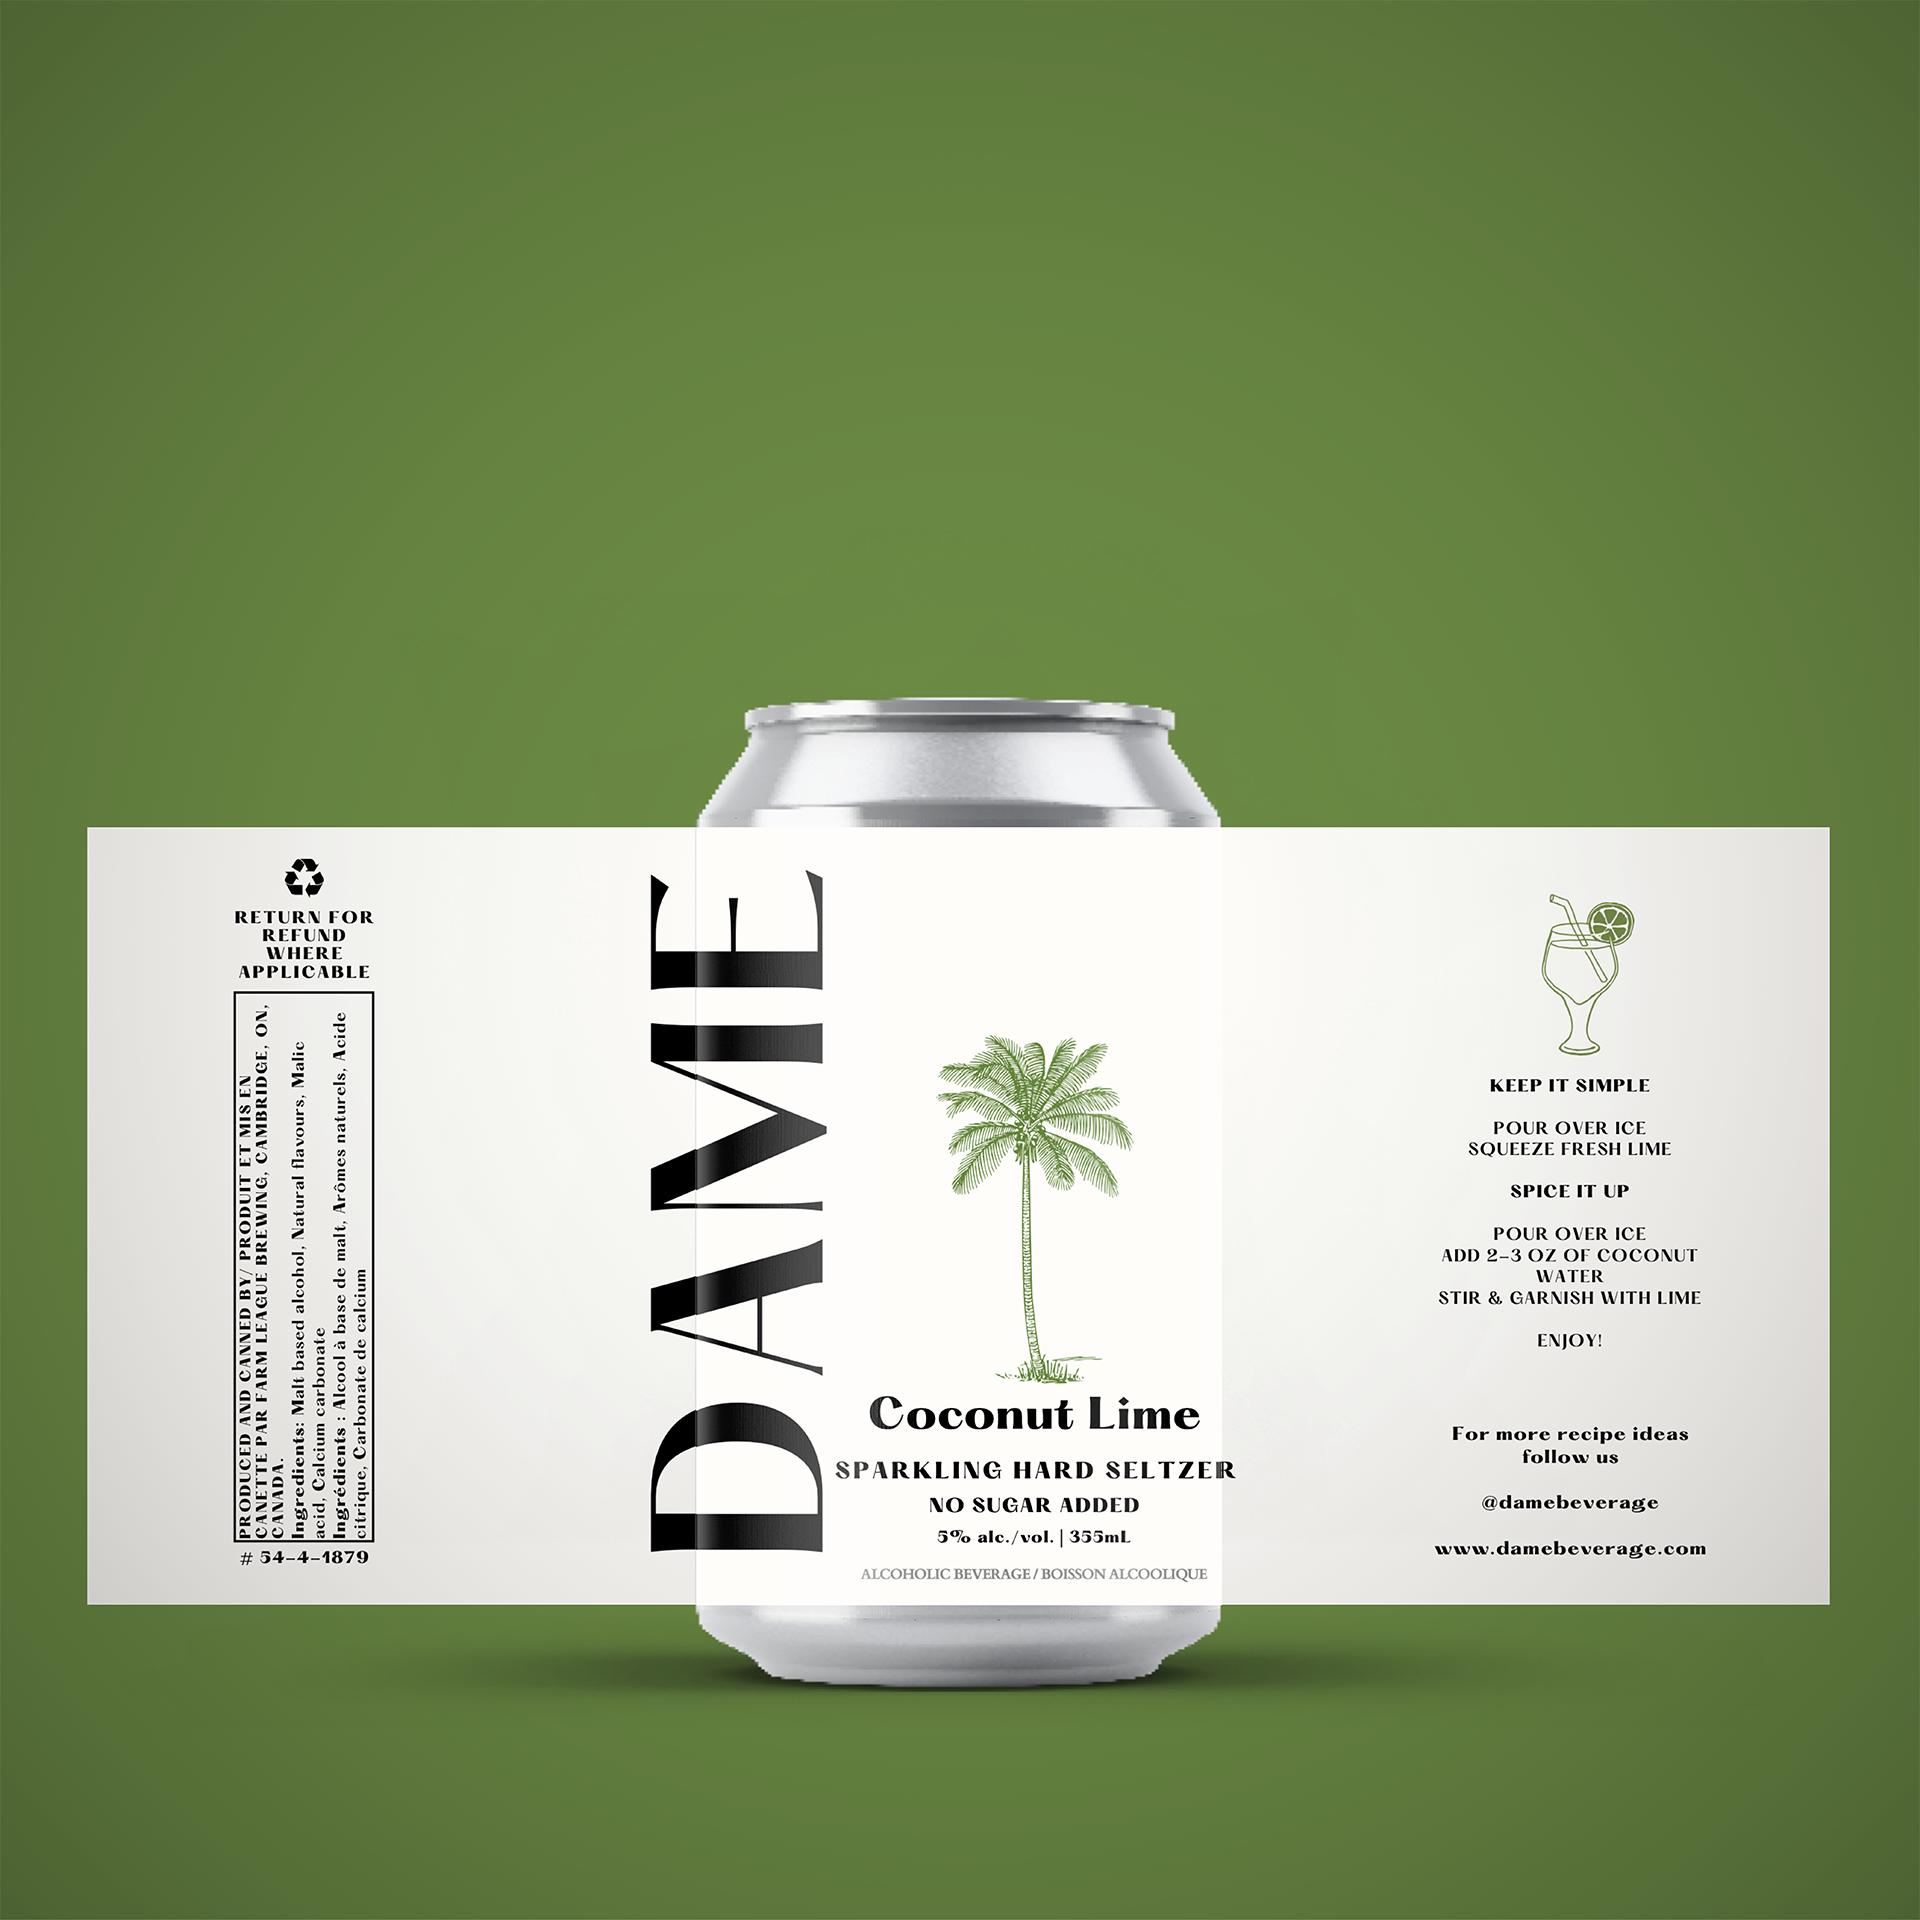 DAME Coconut Lime